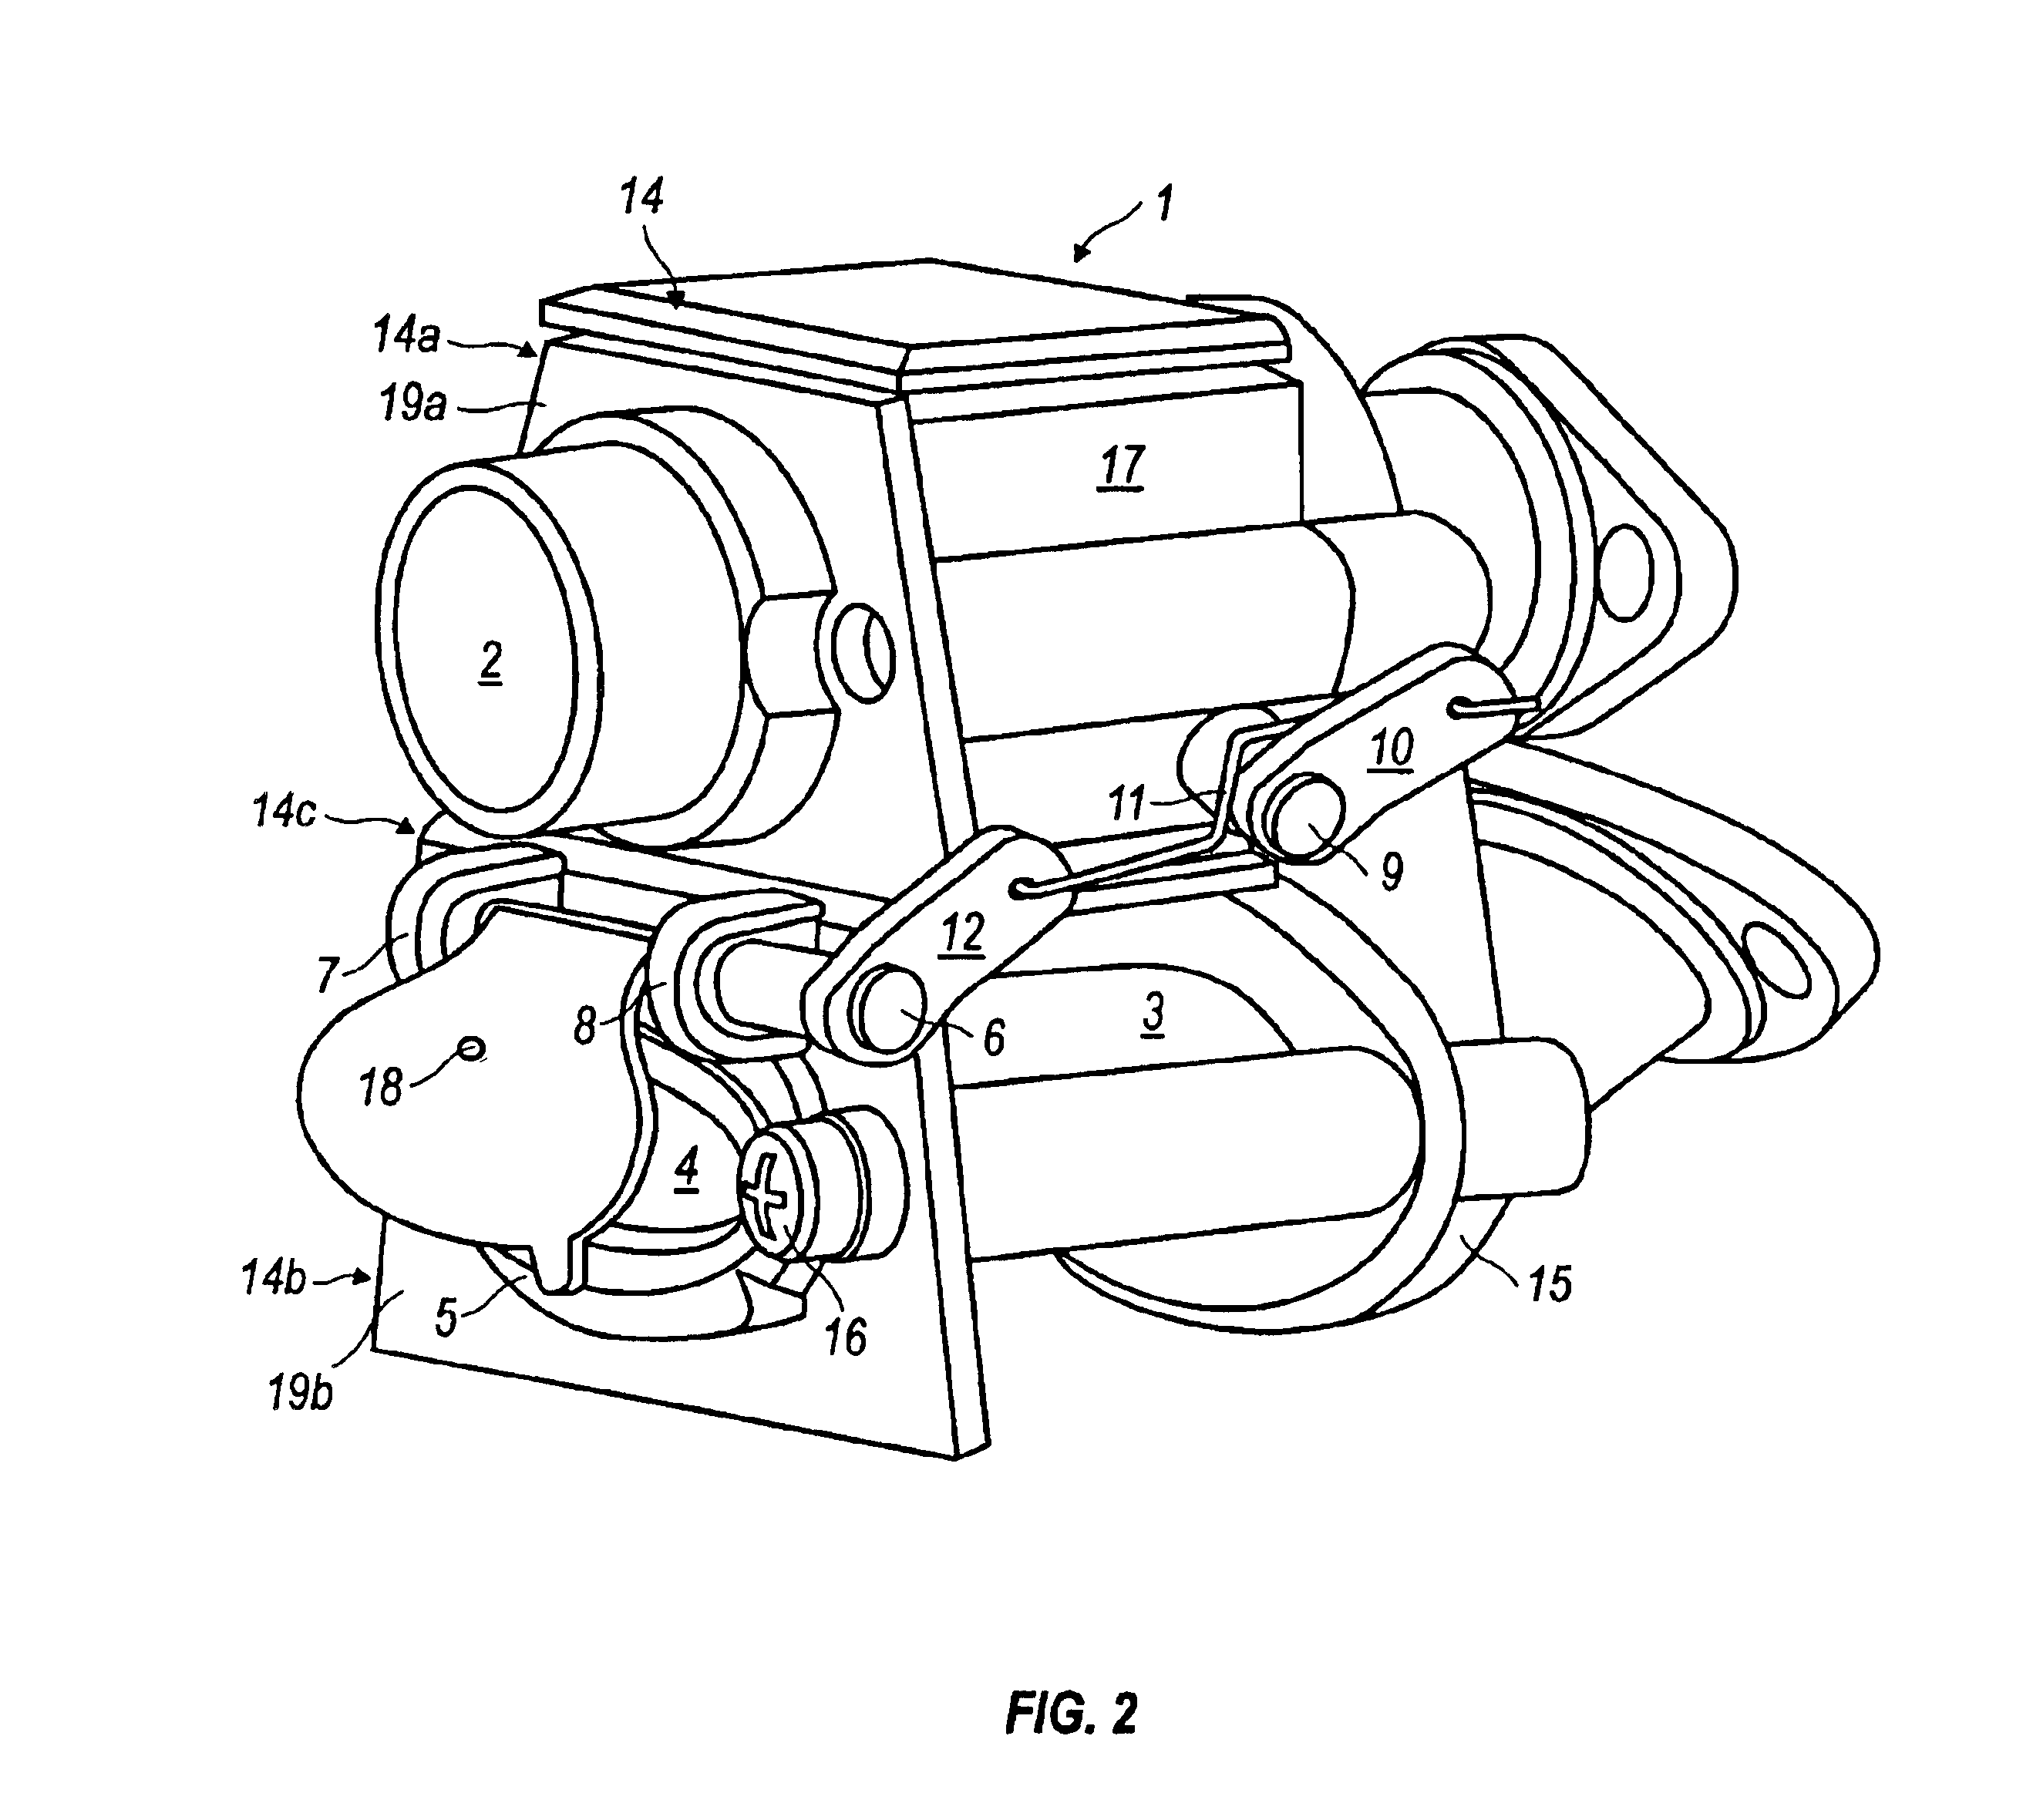 Valve for control of additional air for a two-stroke engine